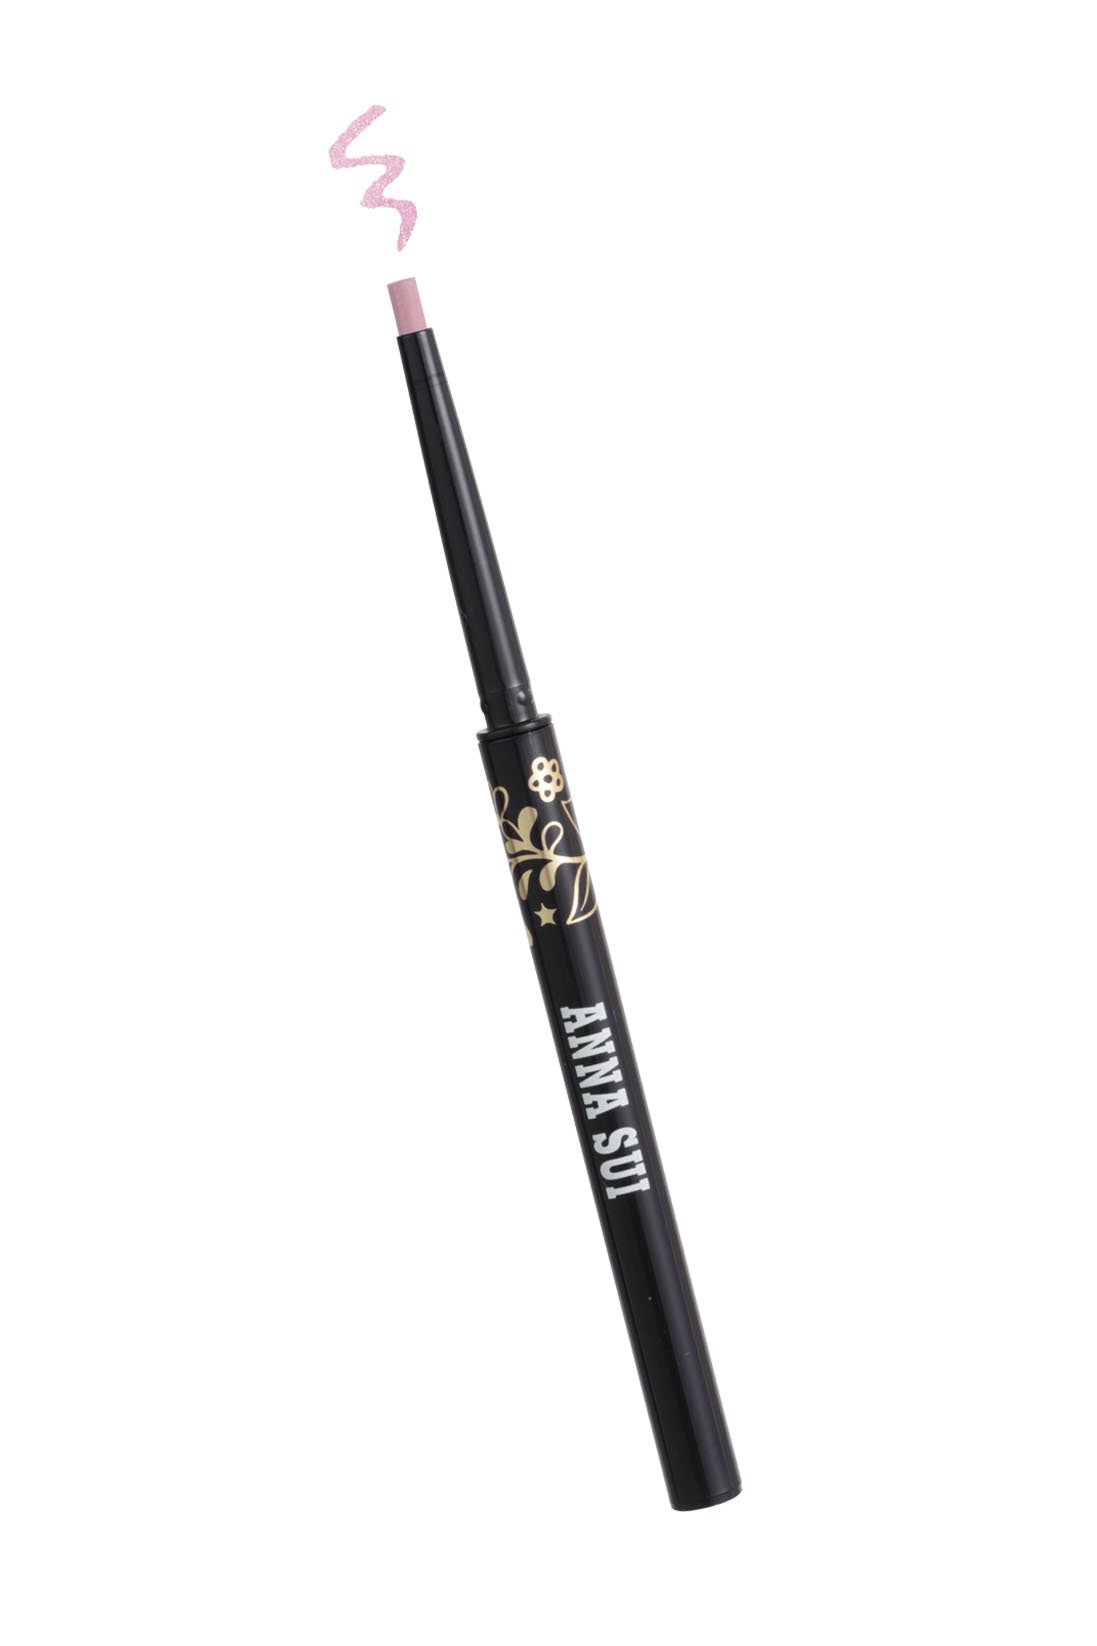 Open Pink Eyeliner in a long cylindrical container, golden floral design, and white Anna Sui label